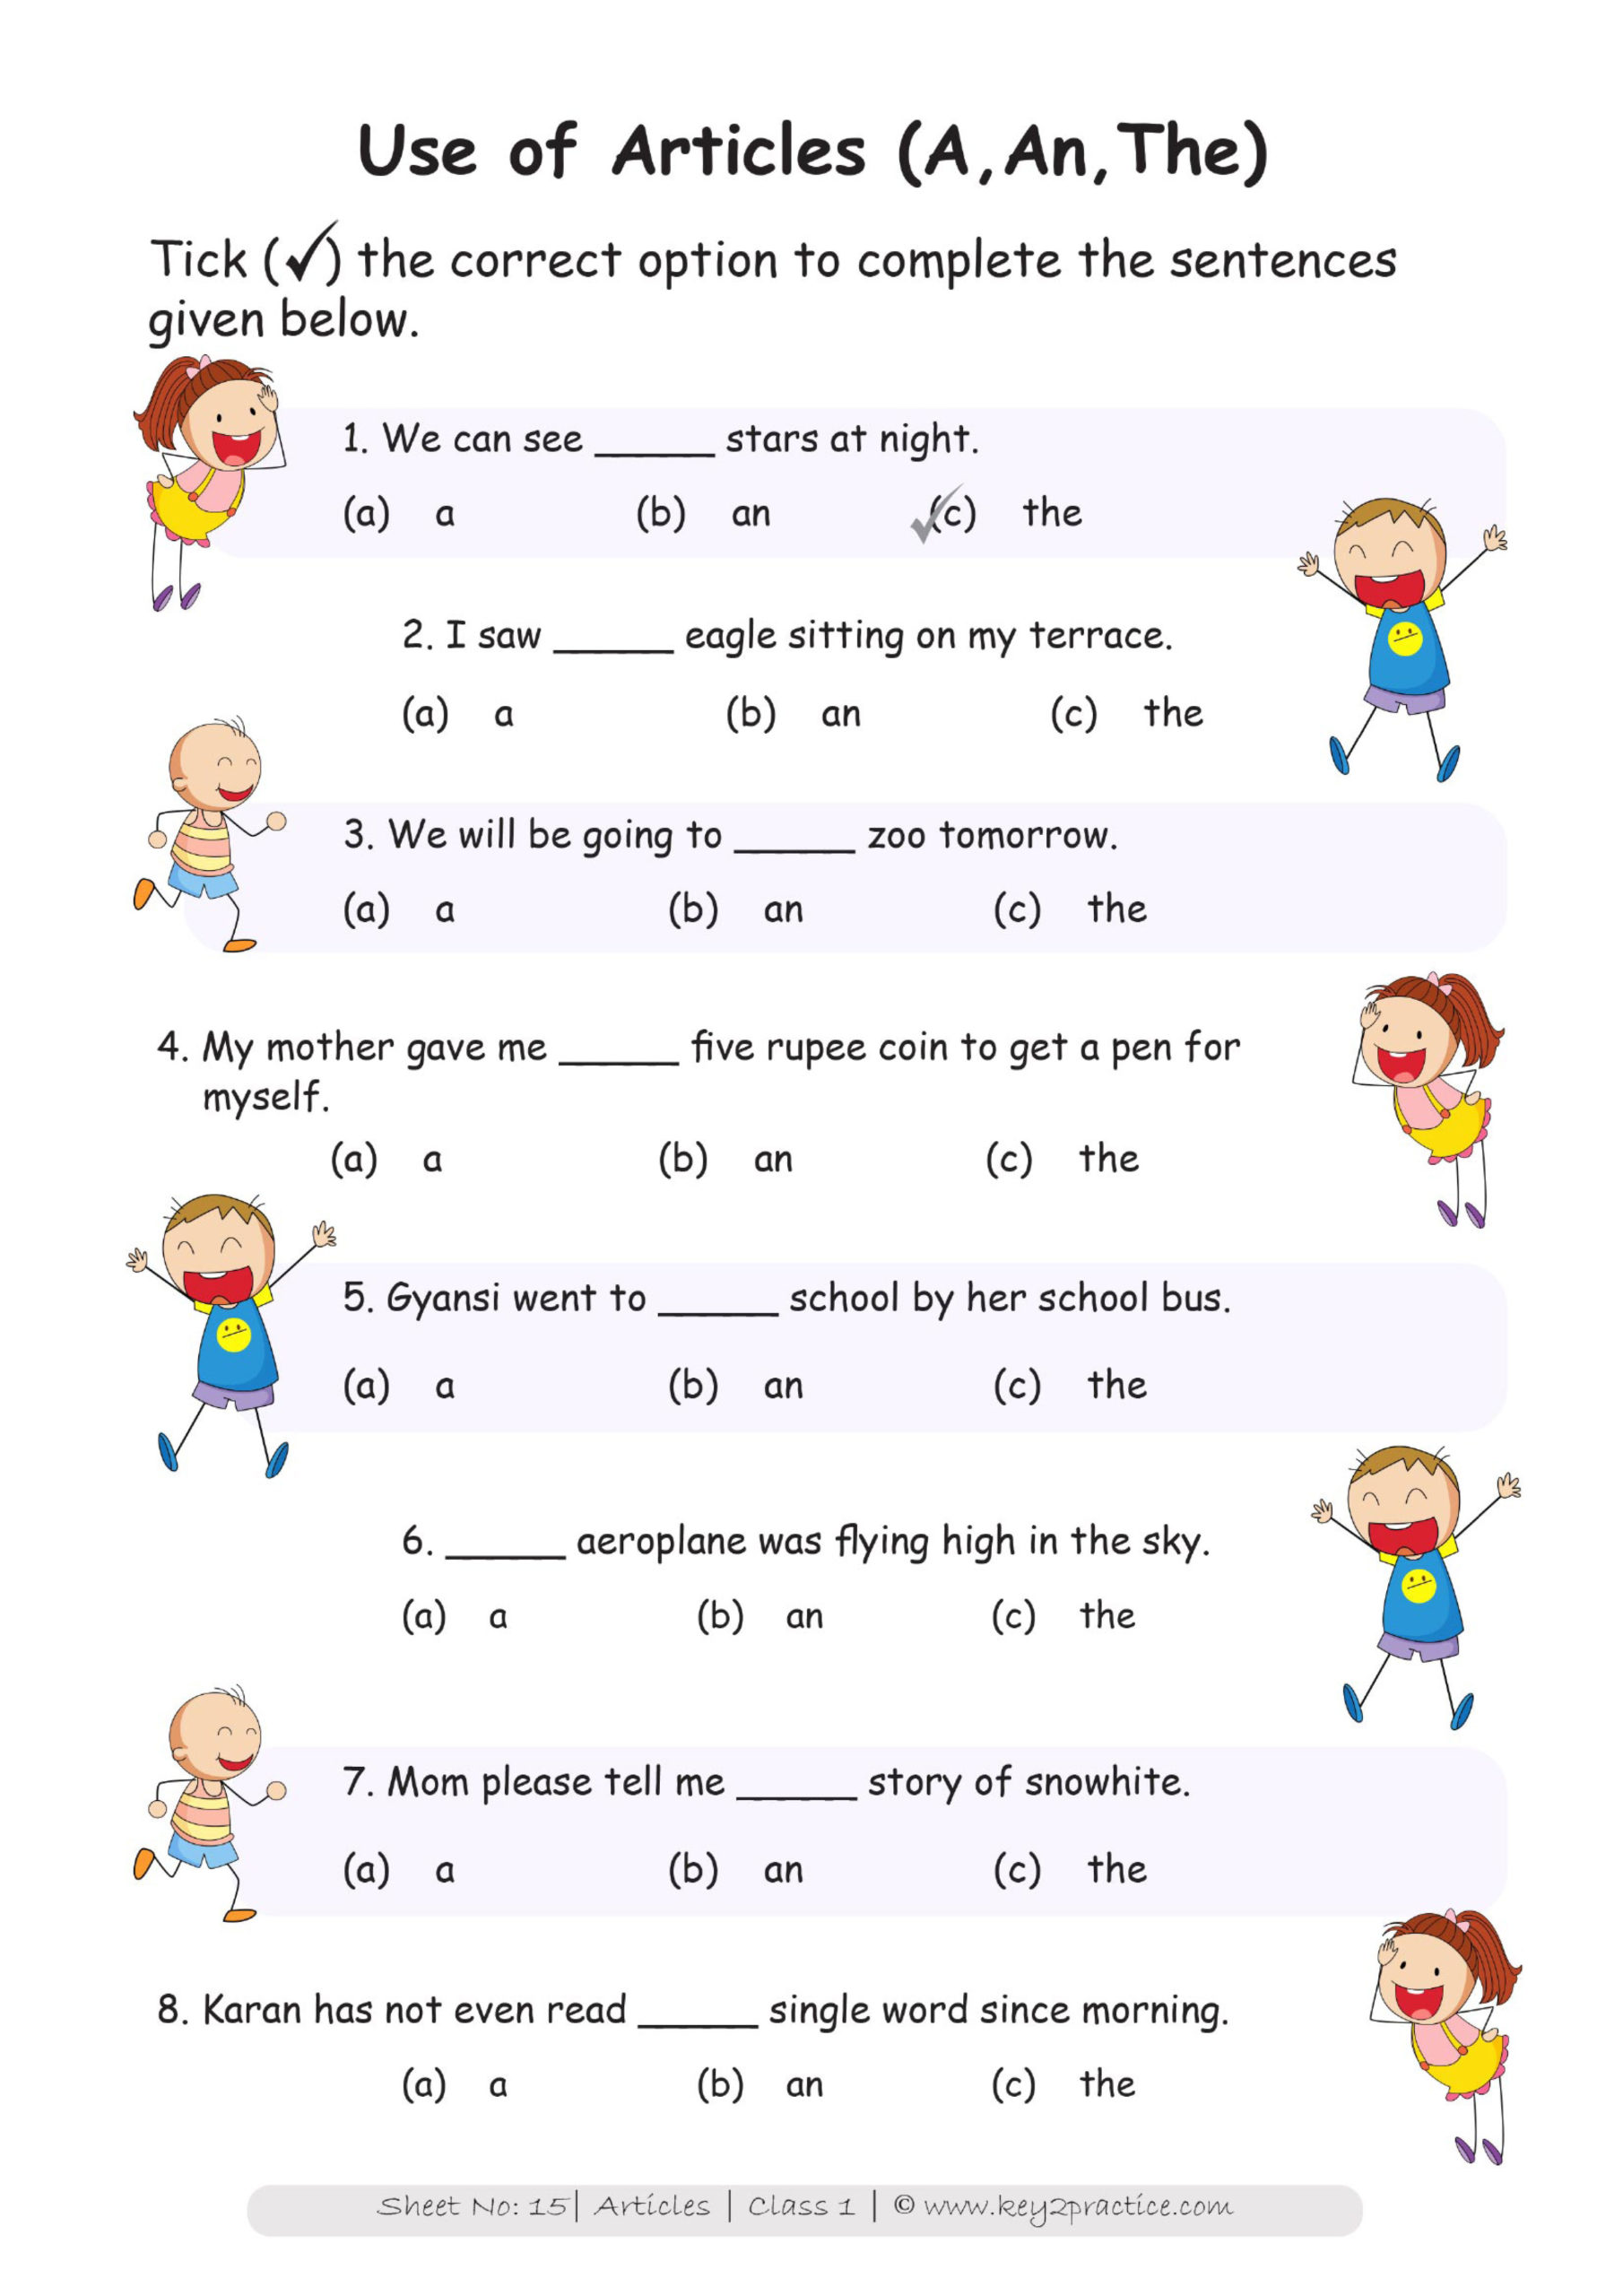 download-cbse-class-1-english-class-test-worksheet-in-pdf-english-worksheets-for-class-1-kids